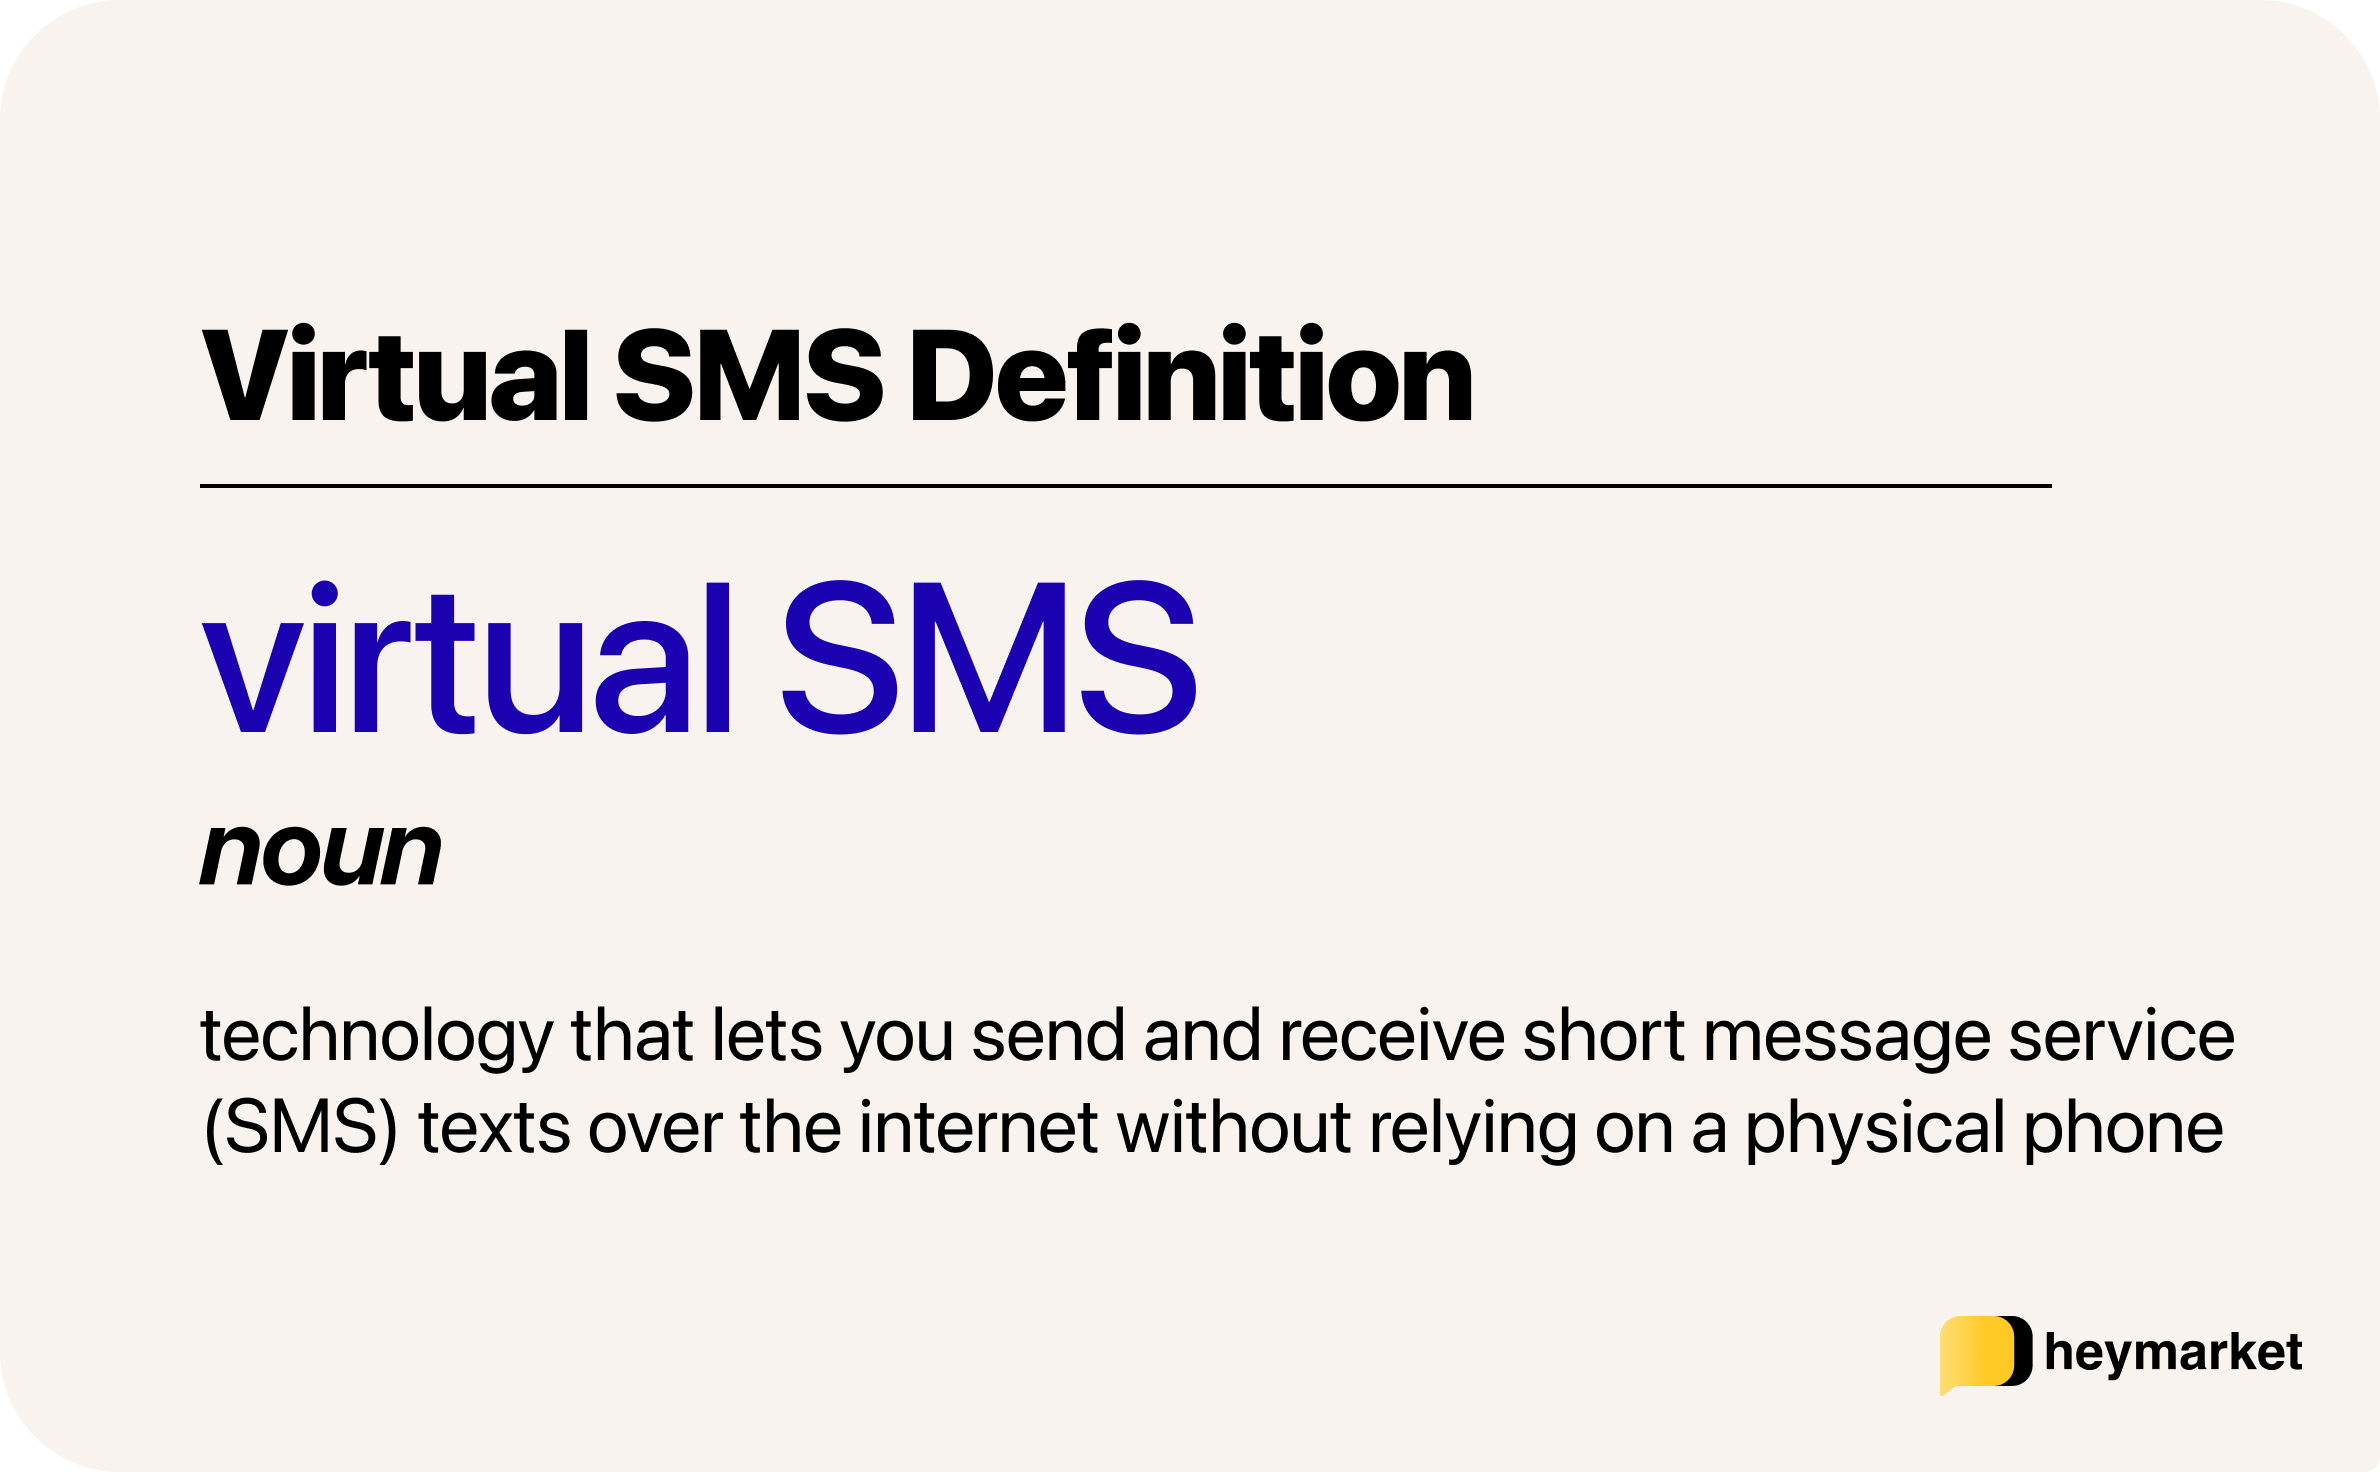 Virtual SMS: technology that lets you send and receive SMS texts over the internet without relying on a physical phone